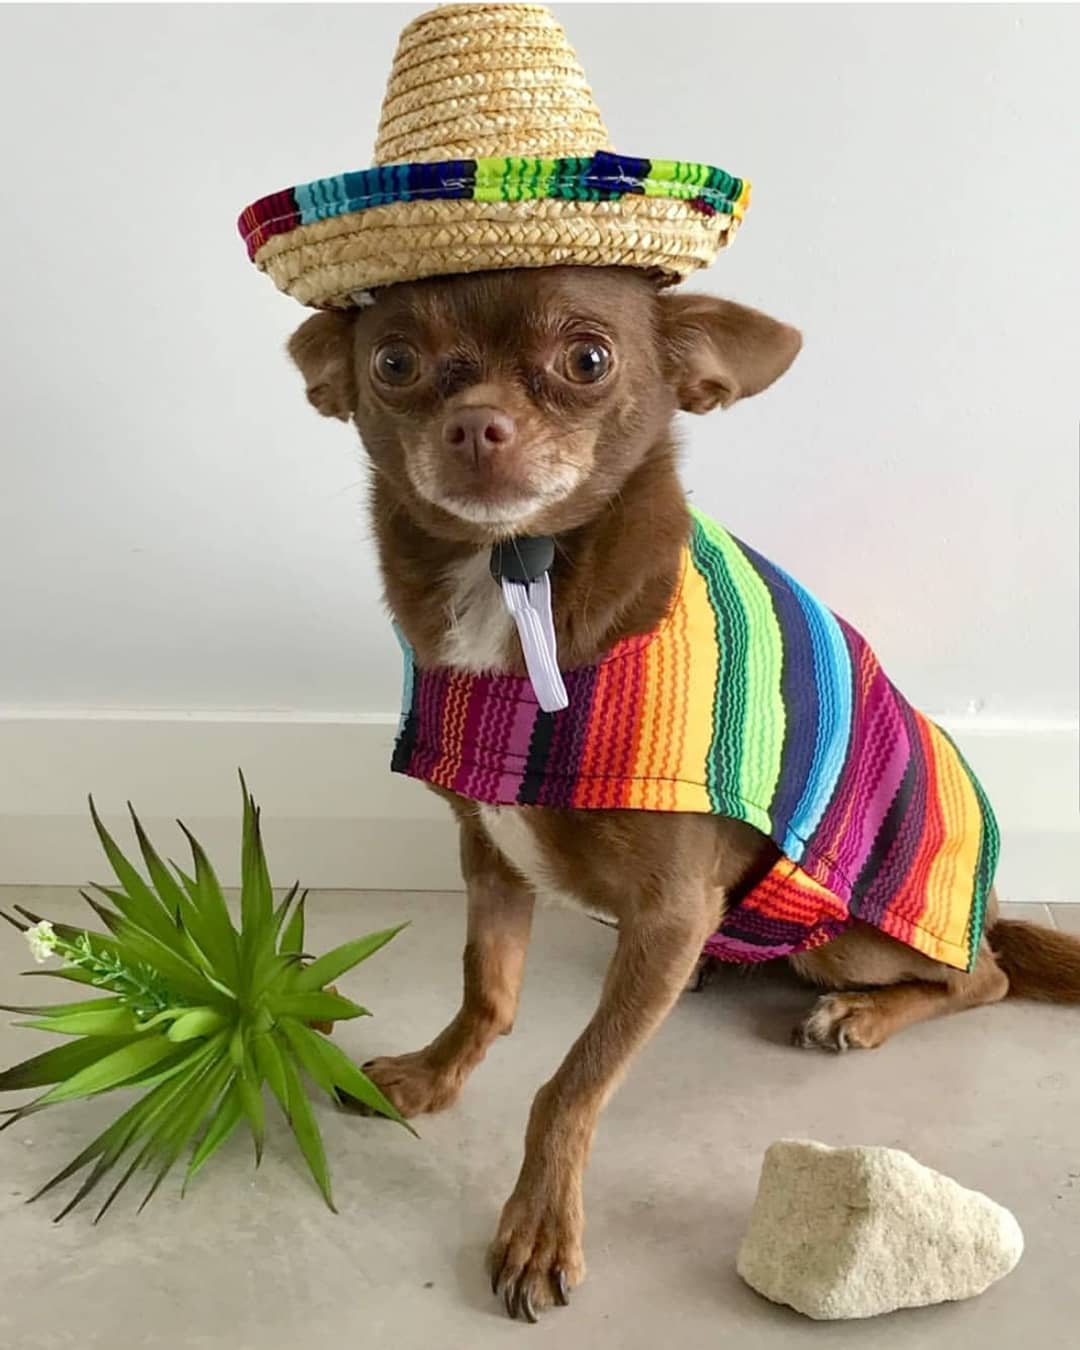 A Chihuahua in a mexican outfit while sitting on the floor